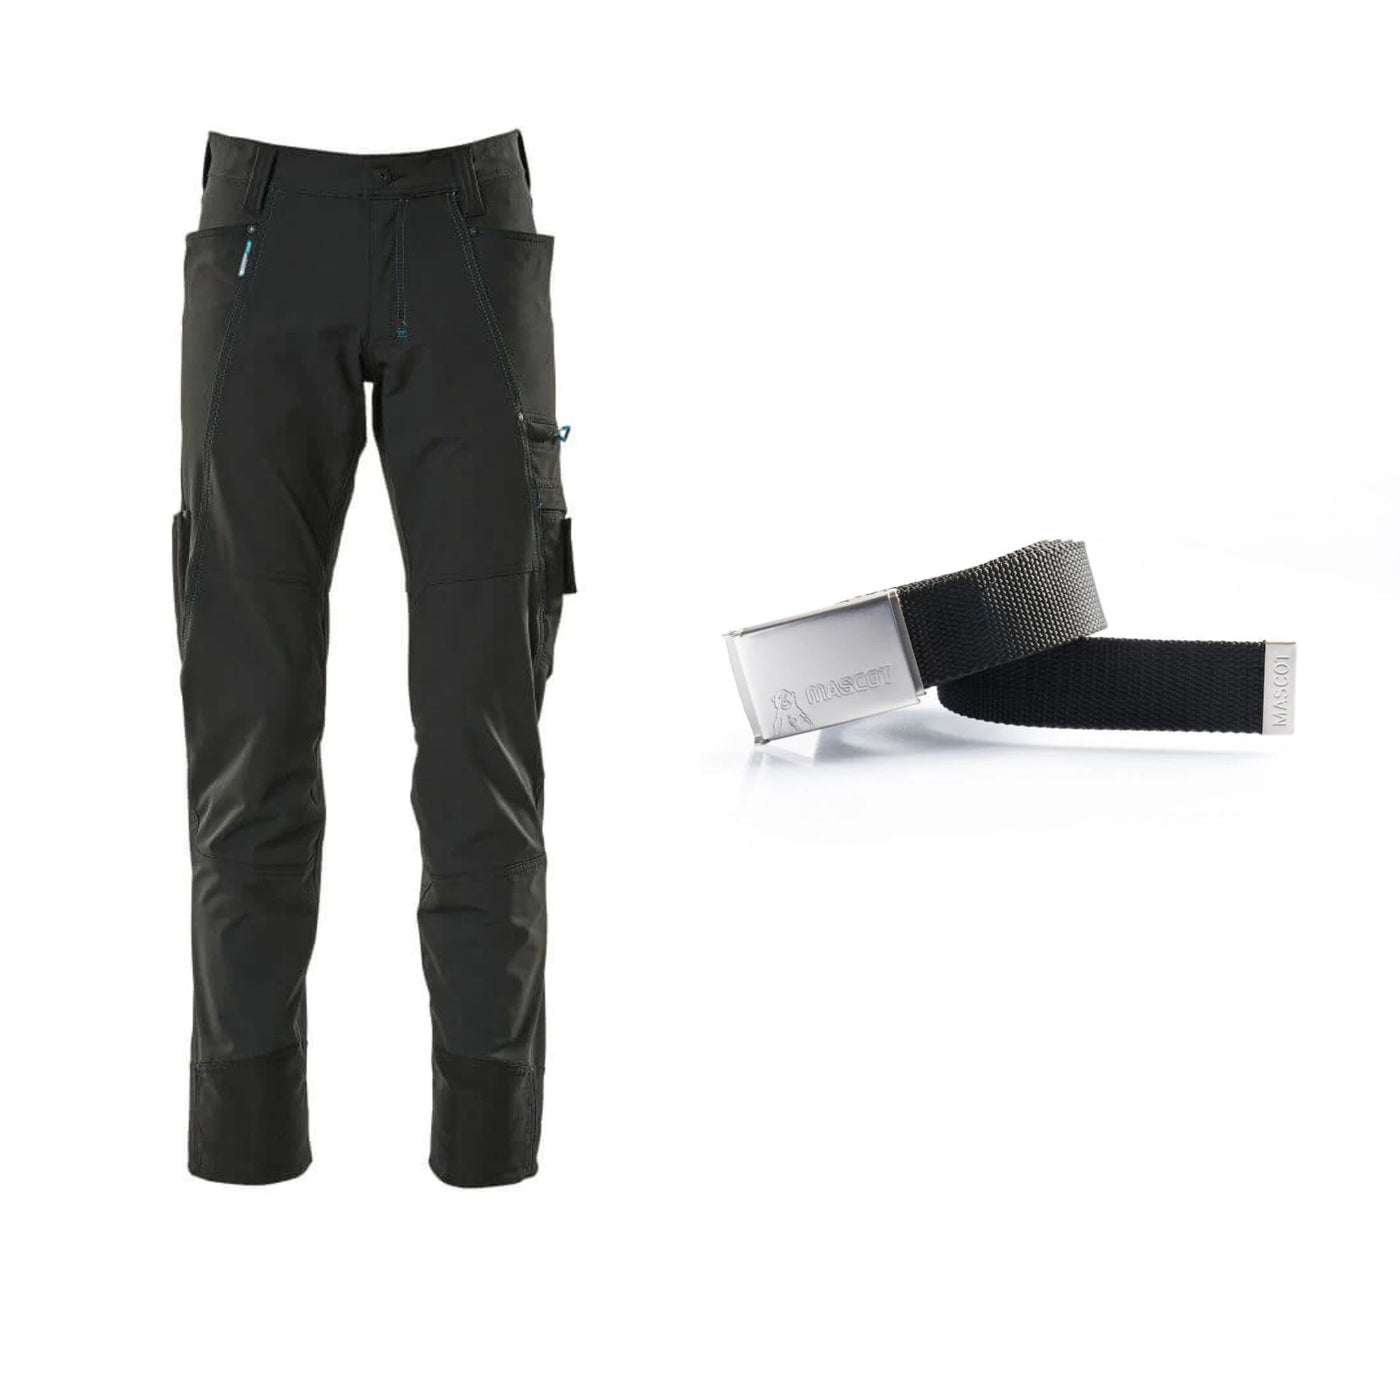 Mascot Special Offer Advanced 17279-311 Trousers Pack - 4-Way-Stretch Trousers + Belt + Knee Pads